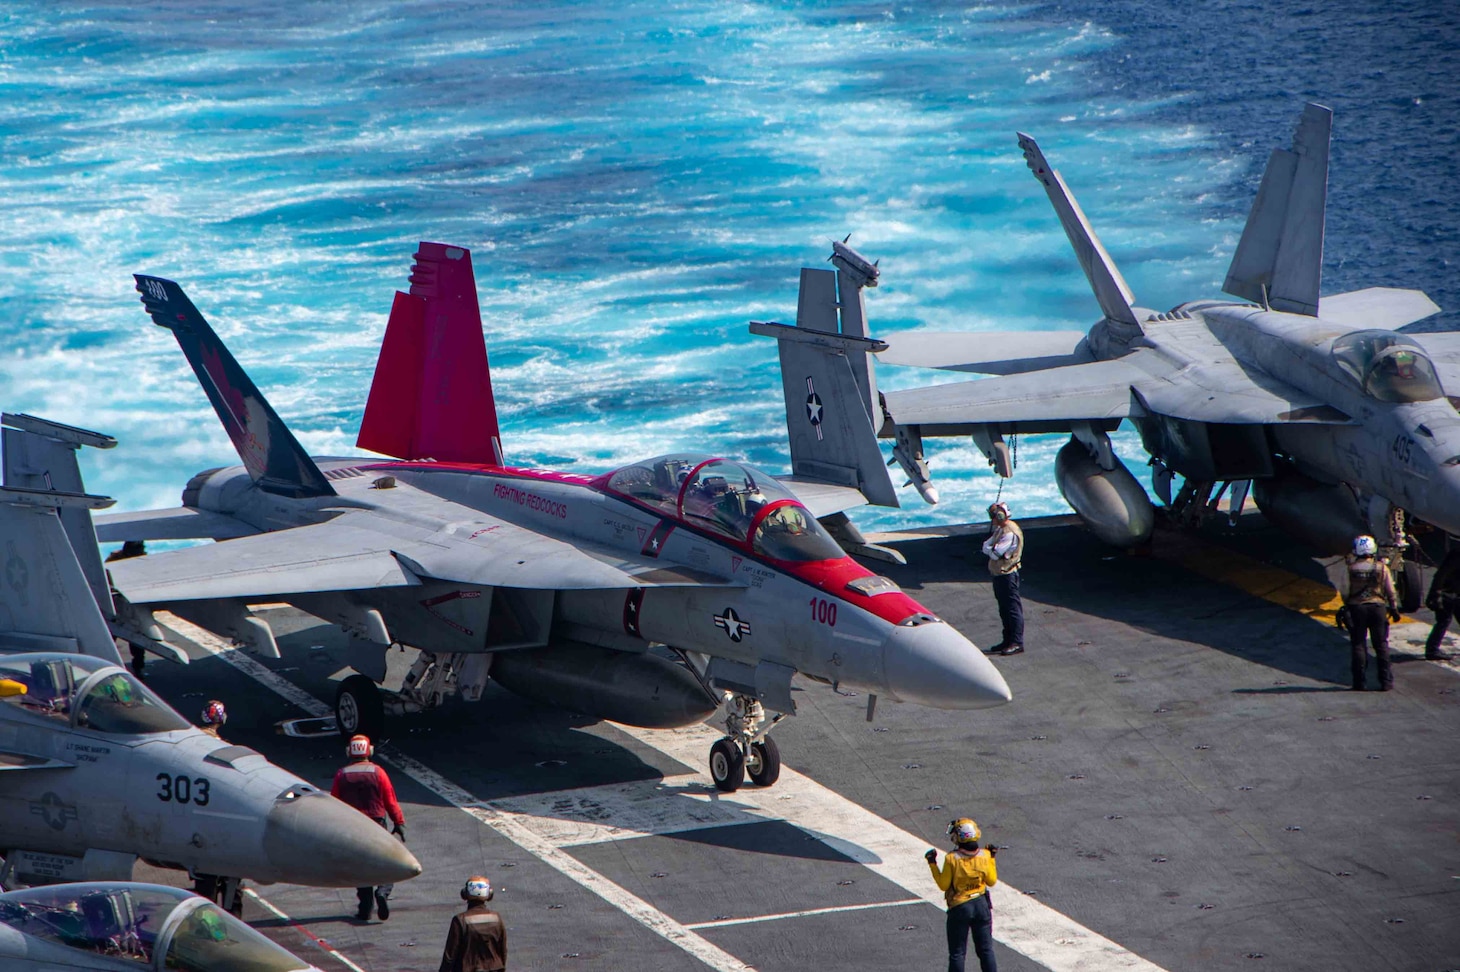 U.S. Navy Capt. Craig Sicola, commanding officer of the aircraft carrier USS Nimitz (CVN 68), front seat, and Cmdr. Luke Edwards, commanding officer of the “Fighting Redcocks” of Strike Fighter Squadron (VFA) 22, taxi across the flight deck of Nimitz in an F/A-18F Super Hornet from VFA-22. Nimitz is in U.S. 7th Fleet conducting routine operations. 7th Fleet is the U.S. Navy's largest forward-deployed numbered fleet, and routinely interacts and operates with allies and partners in preserving a free and open Indo-Pacific region. (U.S. Navy photo by Mass Communication Specialist 3rd Class Emma Burgess)